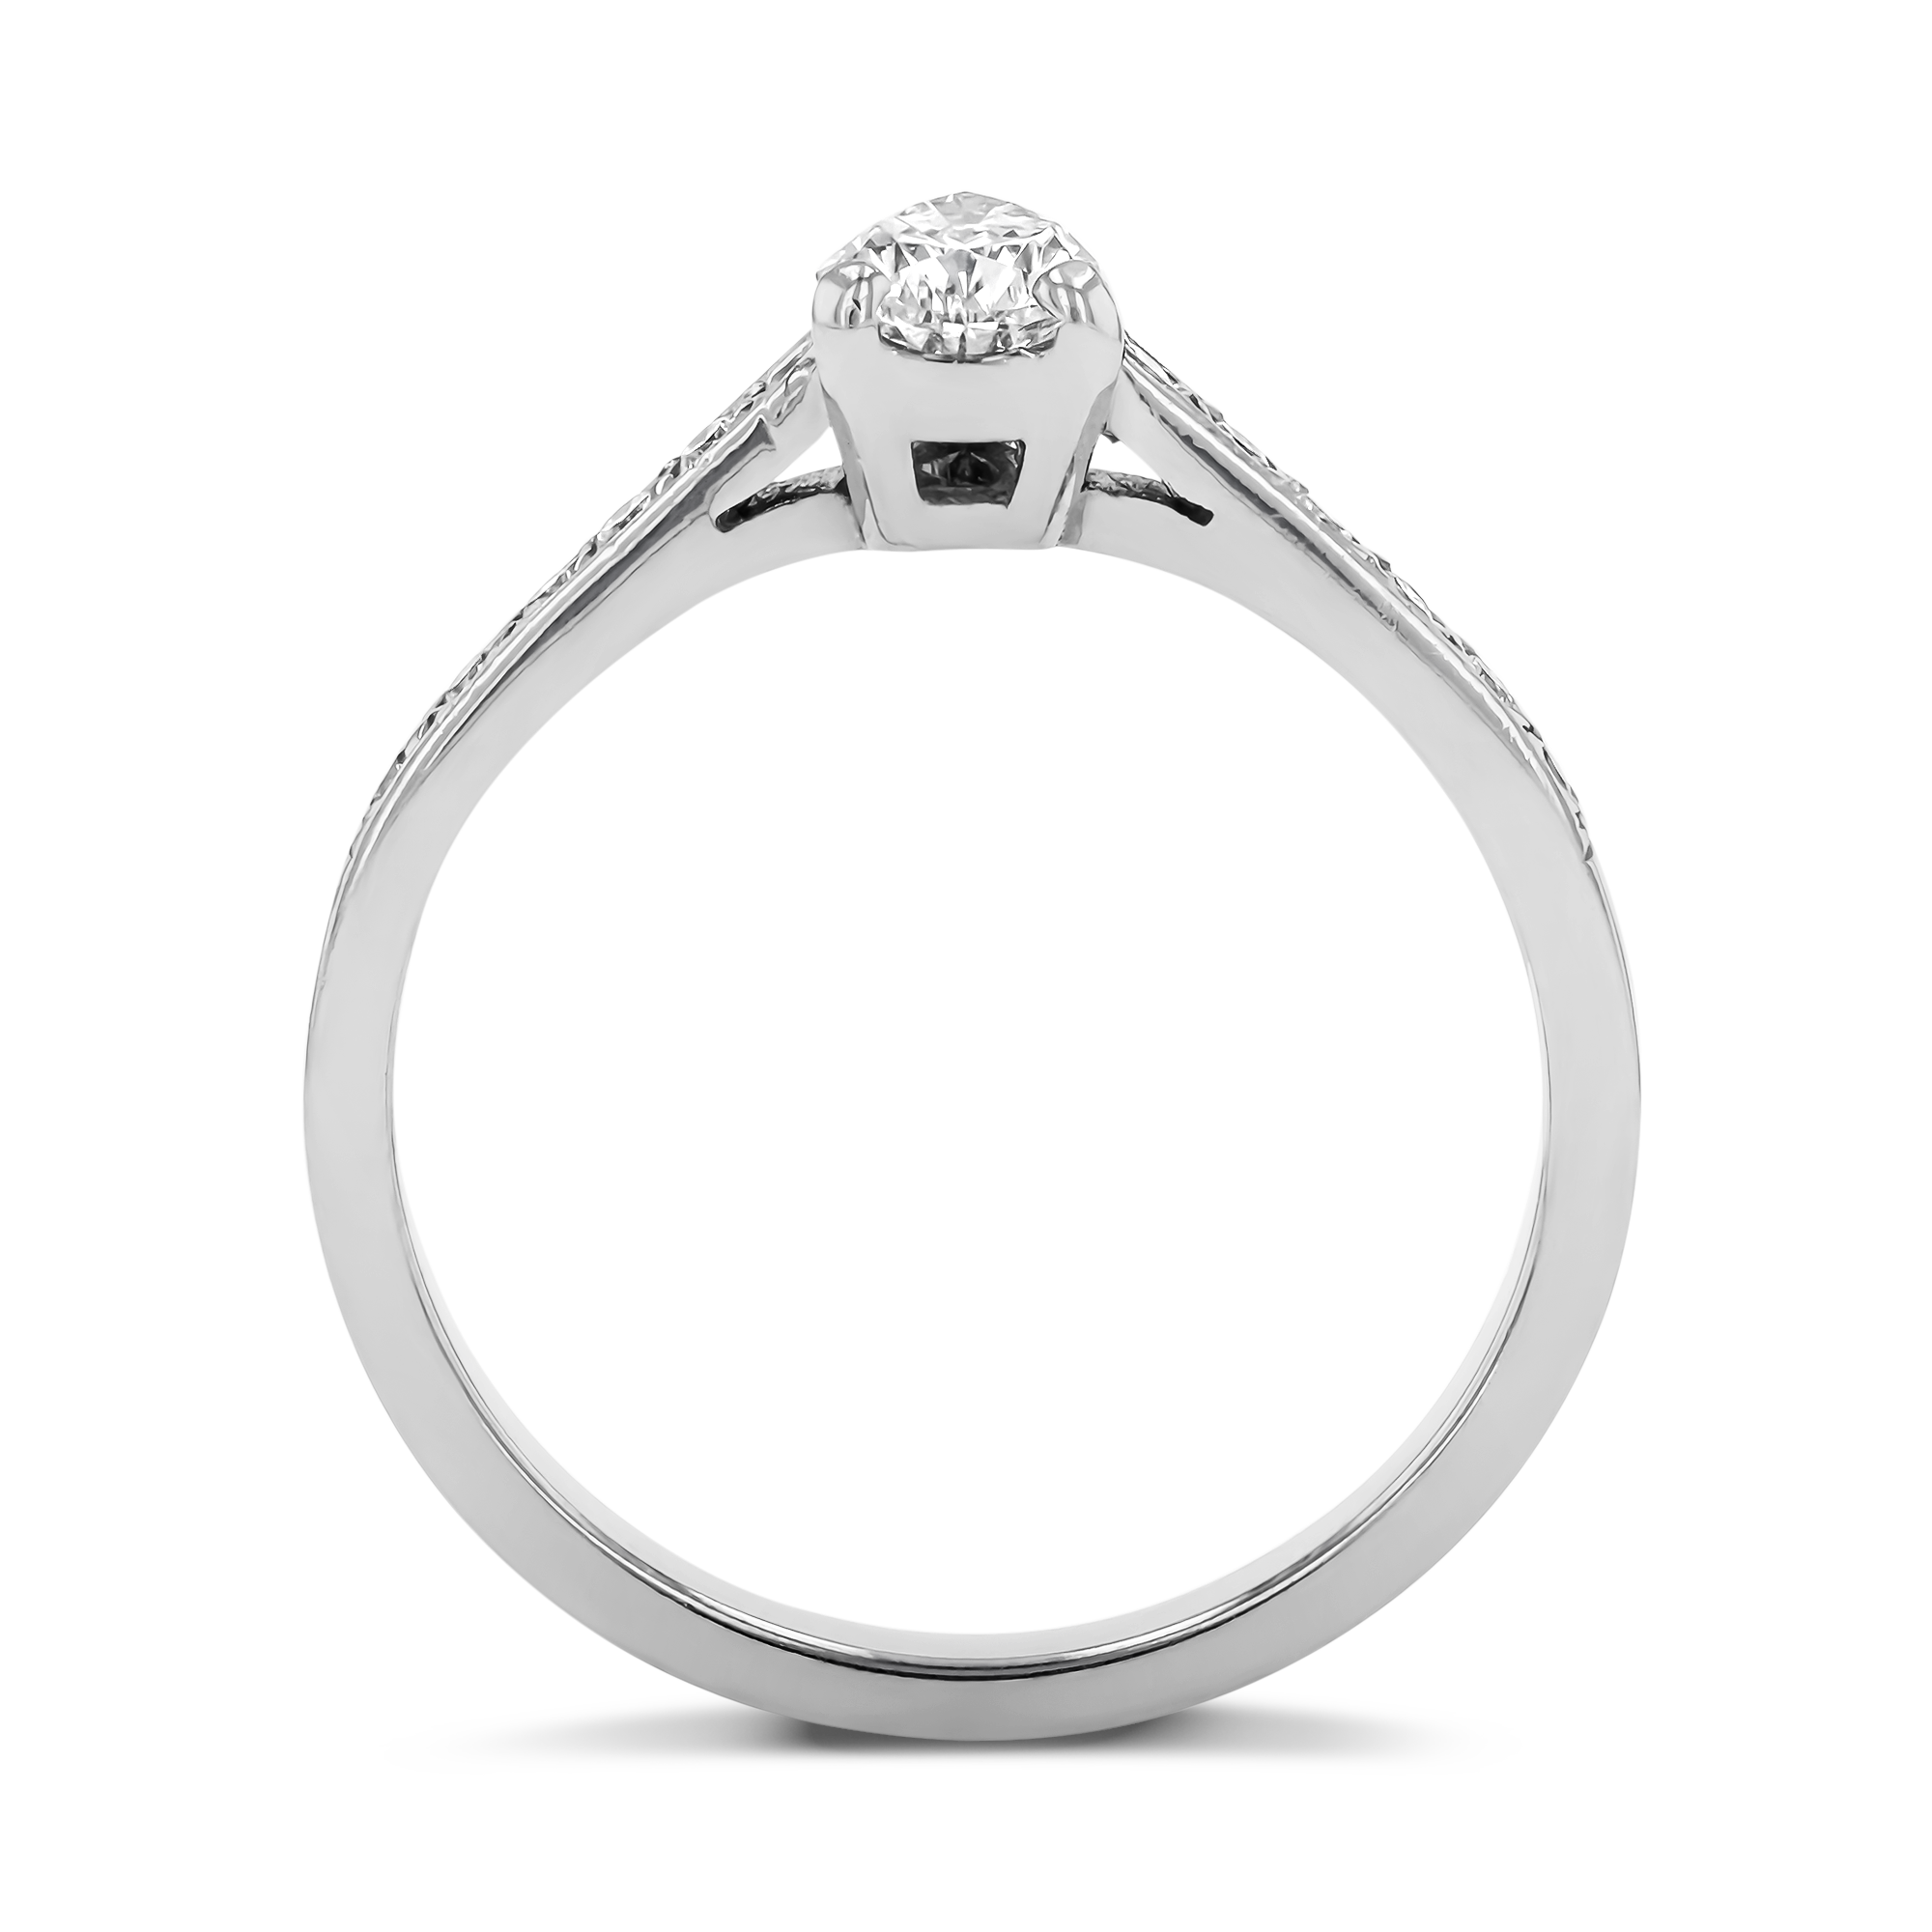 Classic 0.46ct Diamond Solitaire Ring Pearshape, Claw Set_3